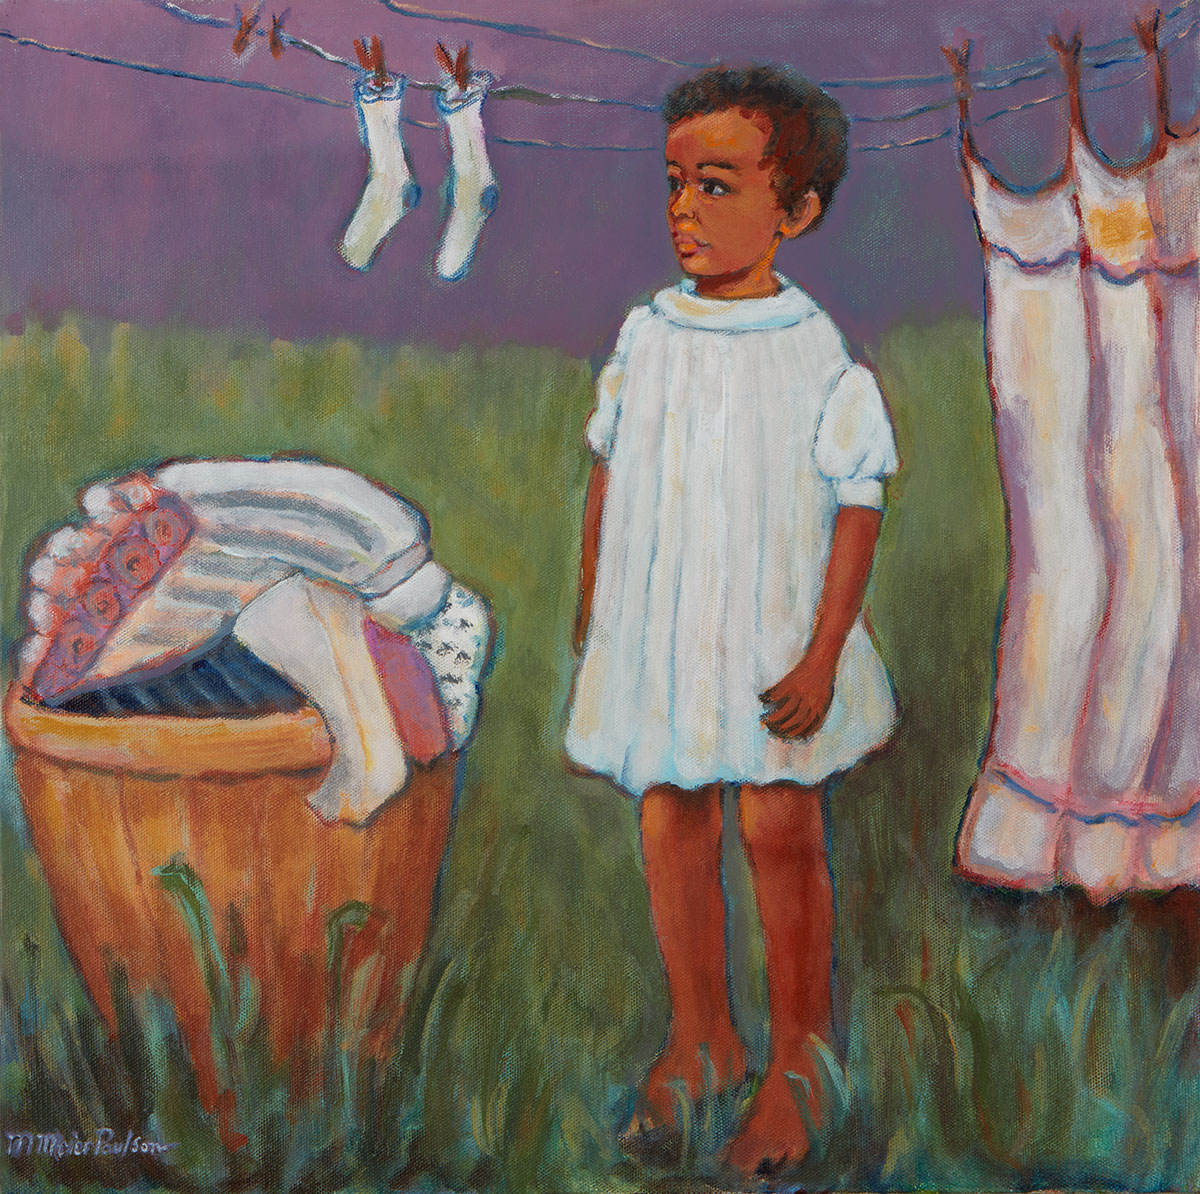 A painting of a person wearing a white dress hanging laundry on a line outside